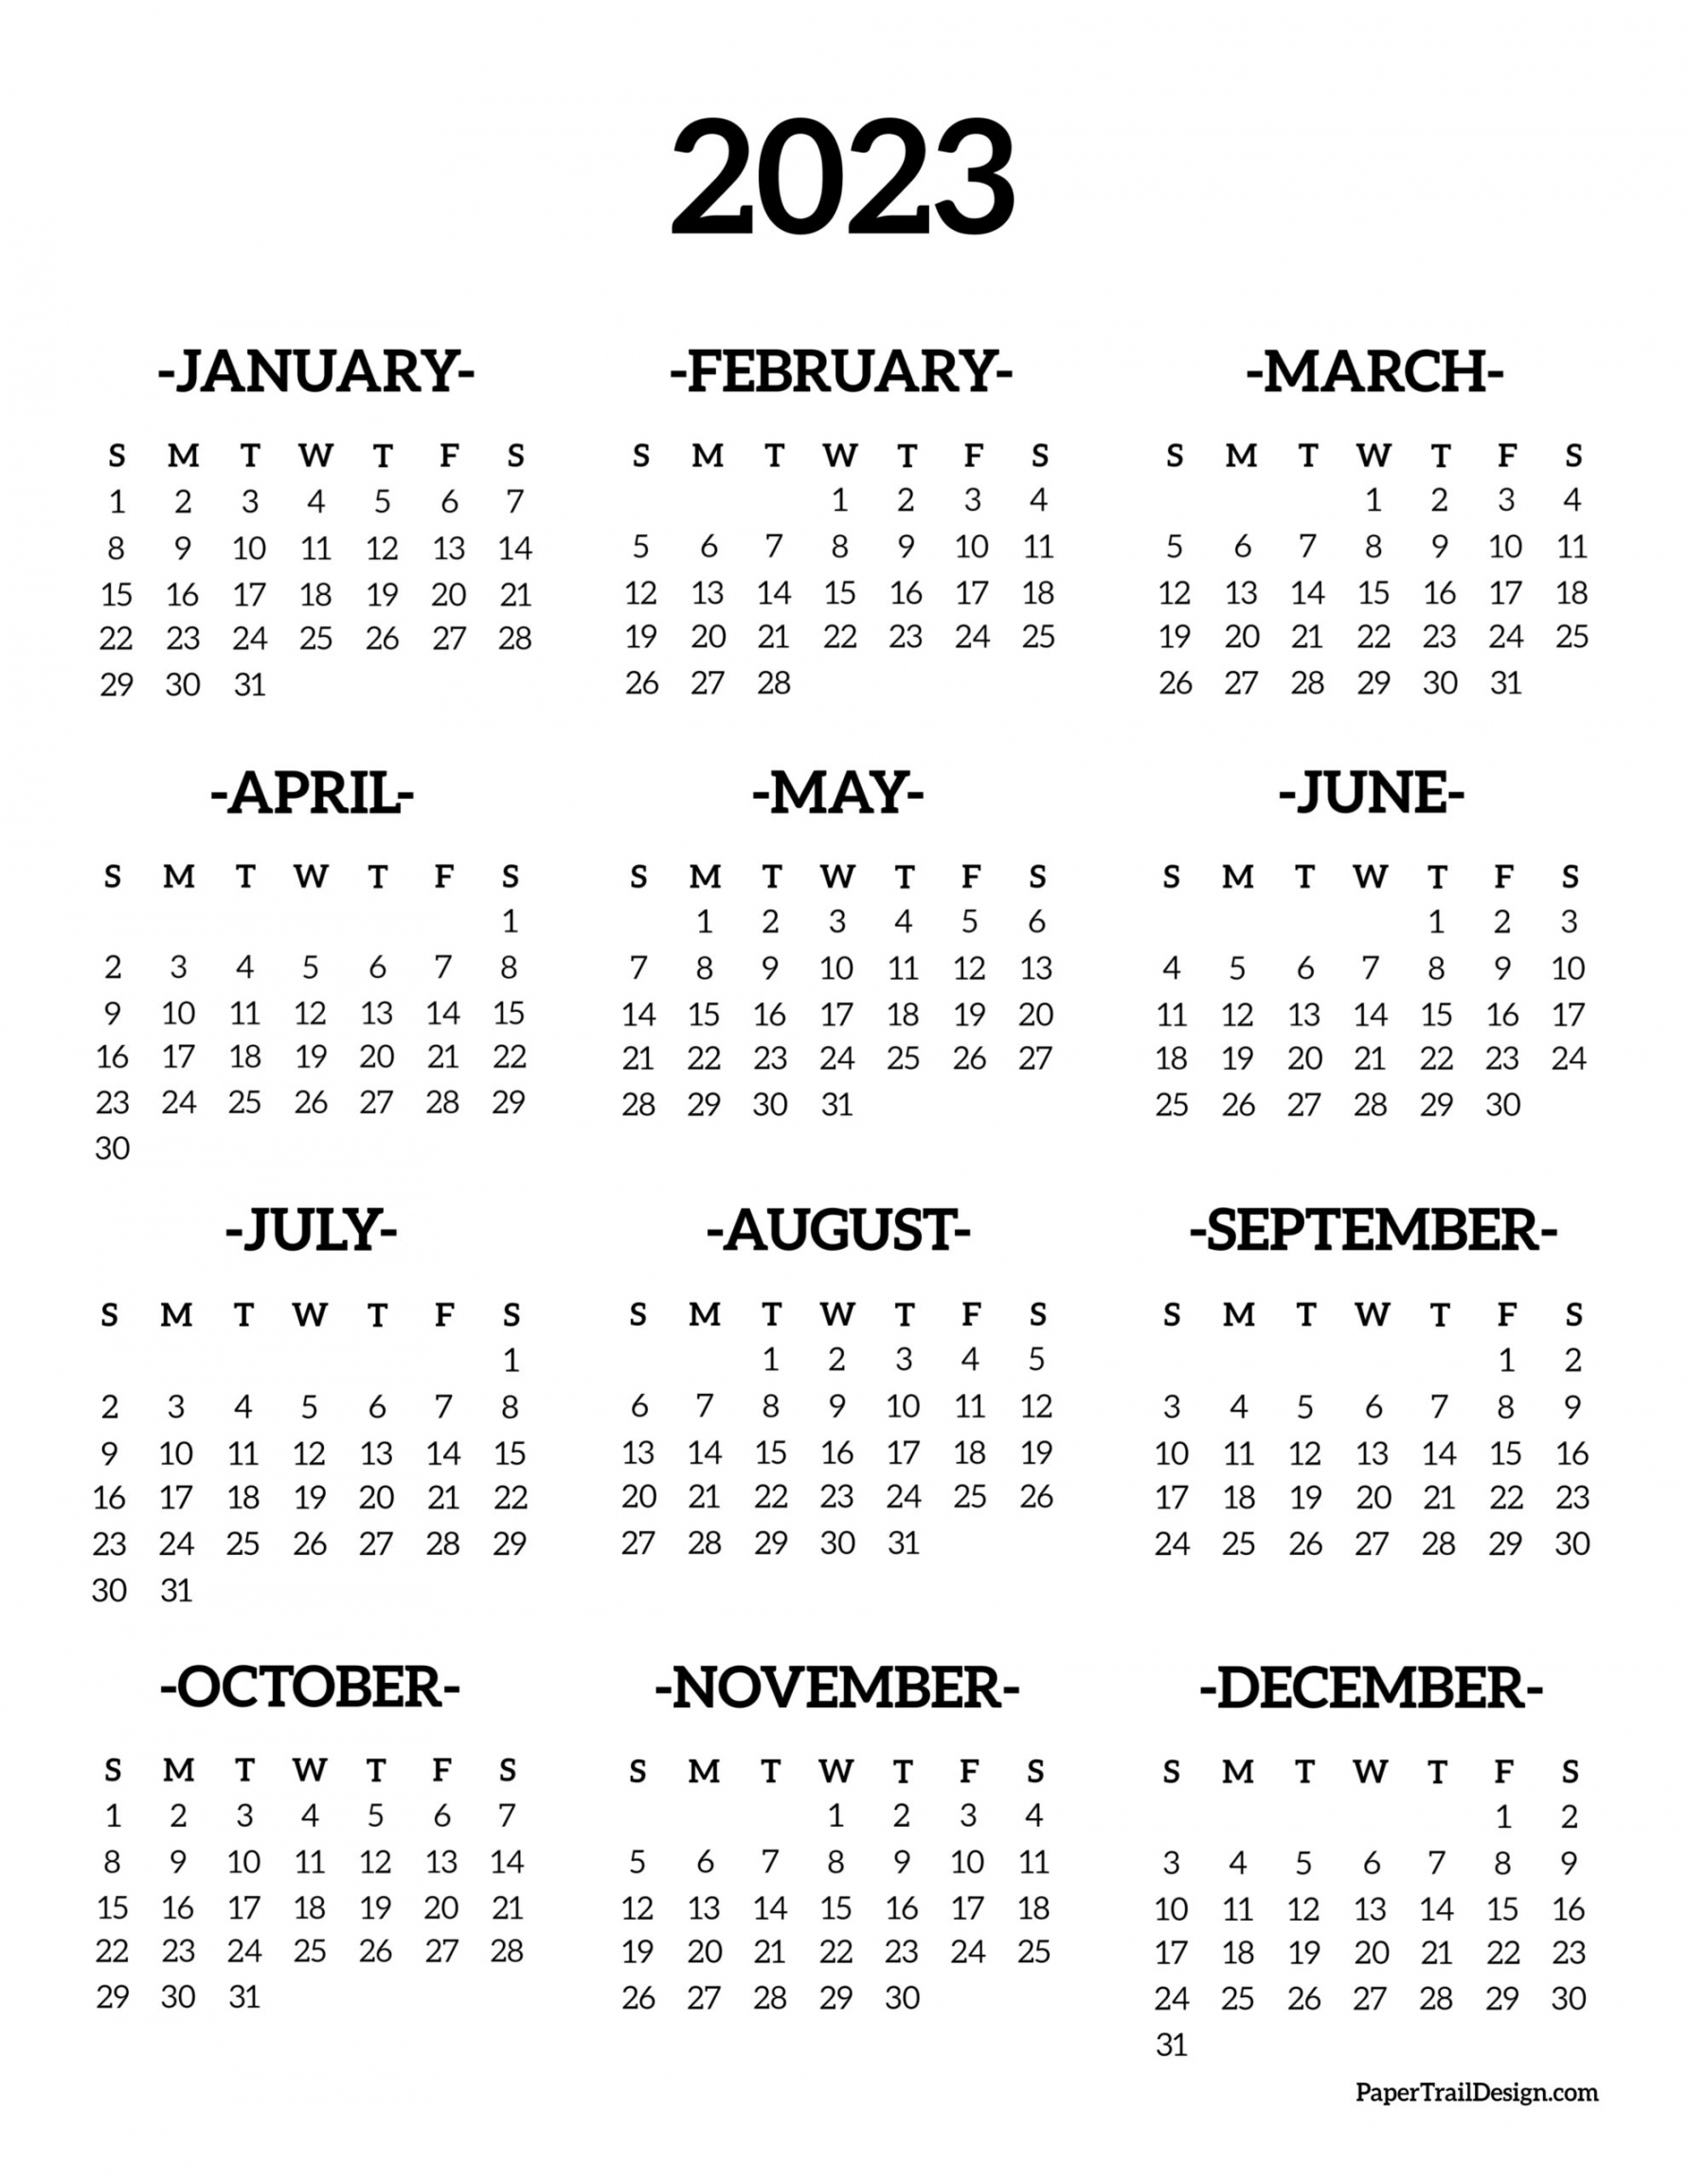 Free Printable 2023 Calendar - Printable - Calendar  Printable One Page - Paper Trail Design